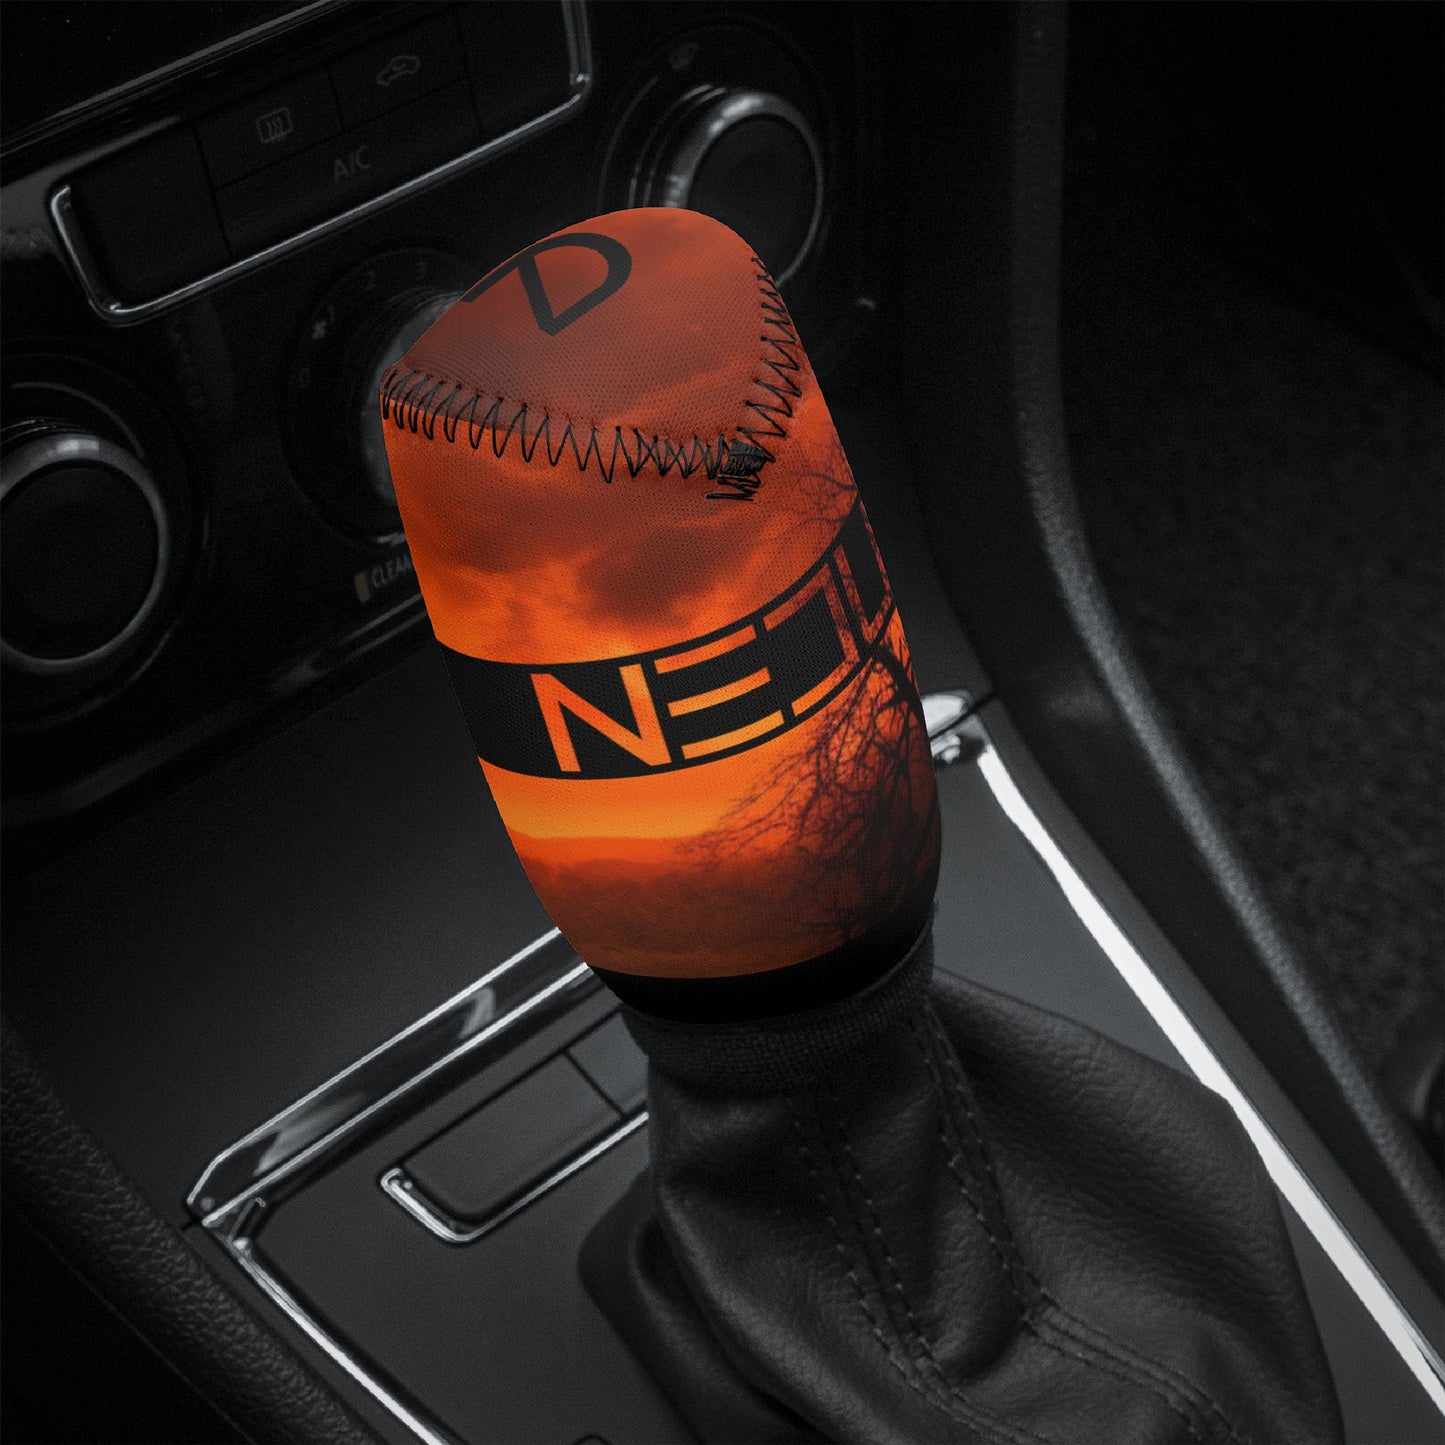 Neduz Crimson Sun Car Shifter Gear Cover: Protect and Style Your Car Interior